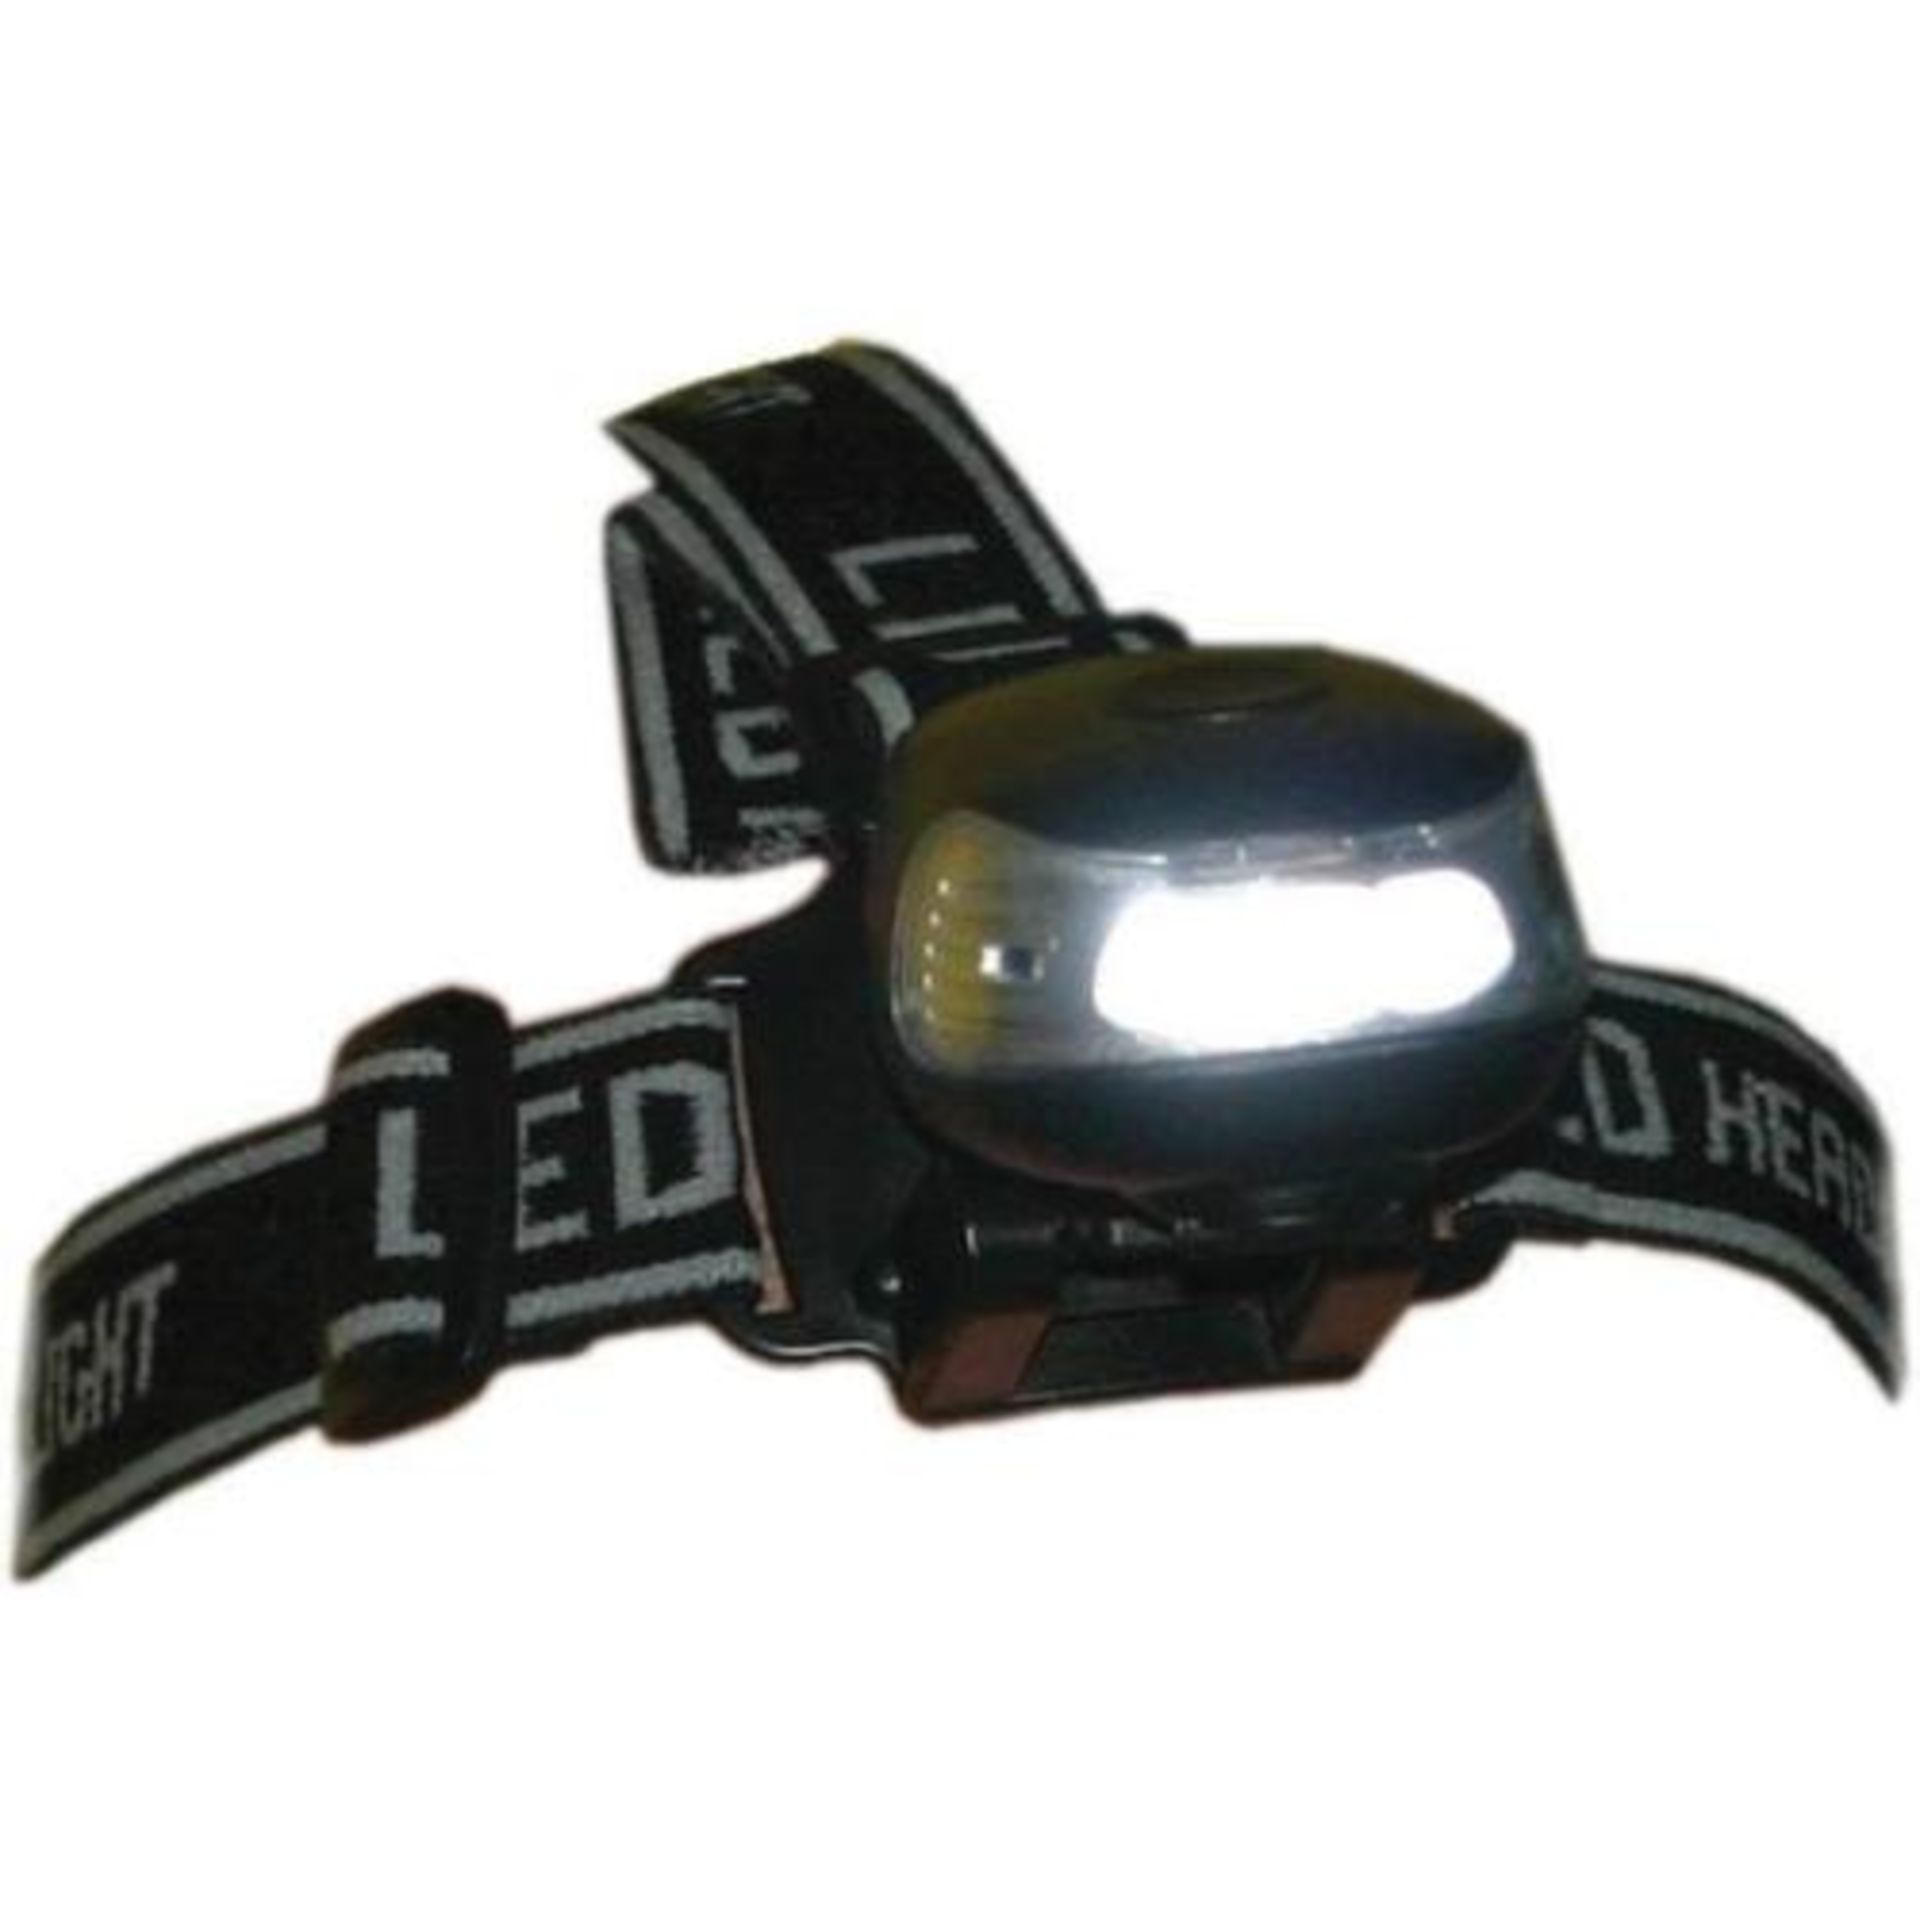 V Tritronic 3 Led wind up Head lamp No batteries required £19.99 X  6  Bid price to be multiplied by